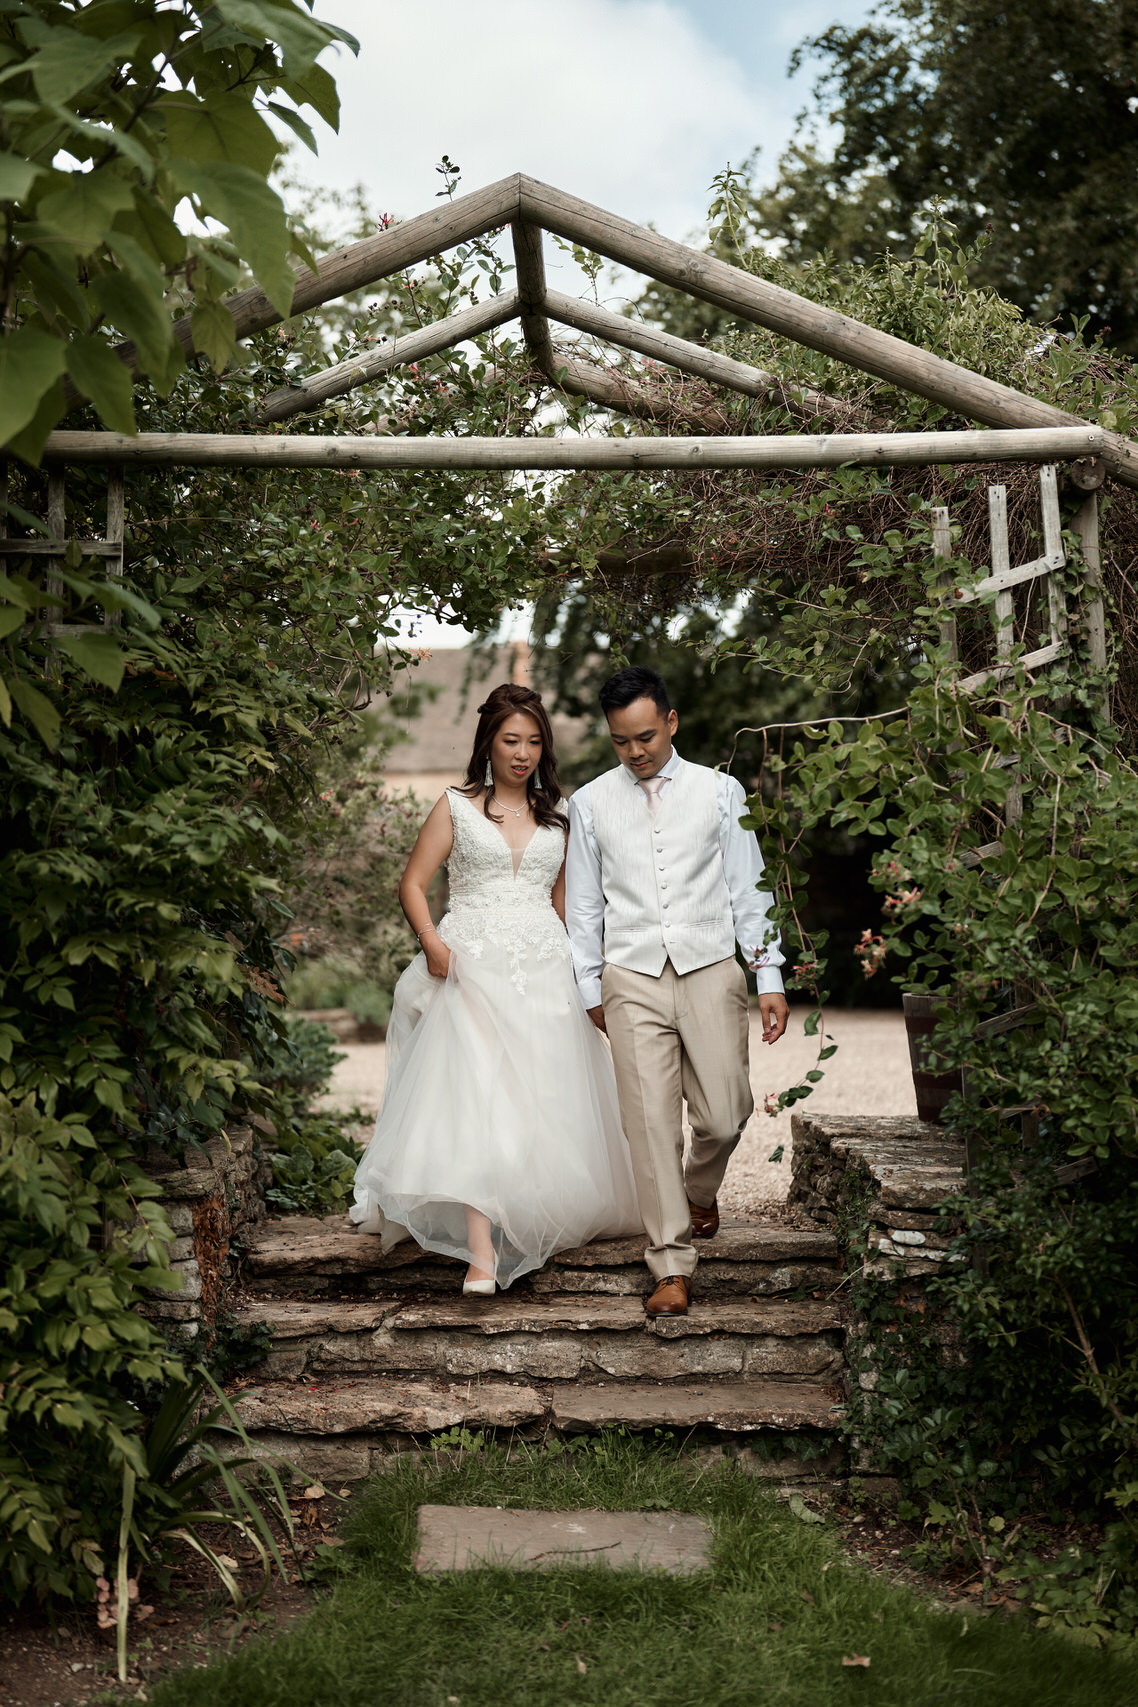 A couple getting married strolling down a garden path.